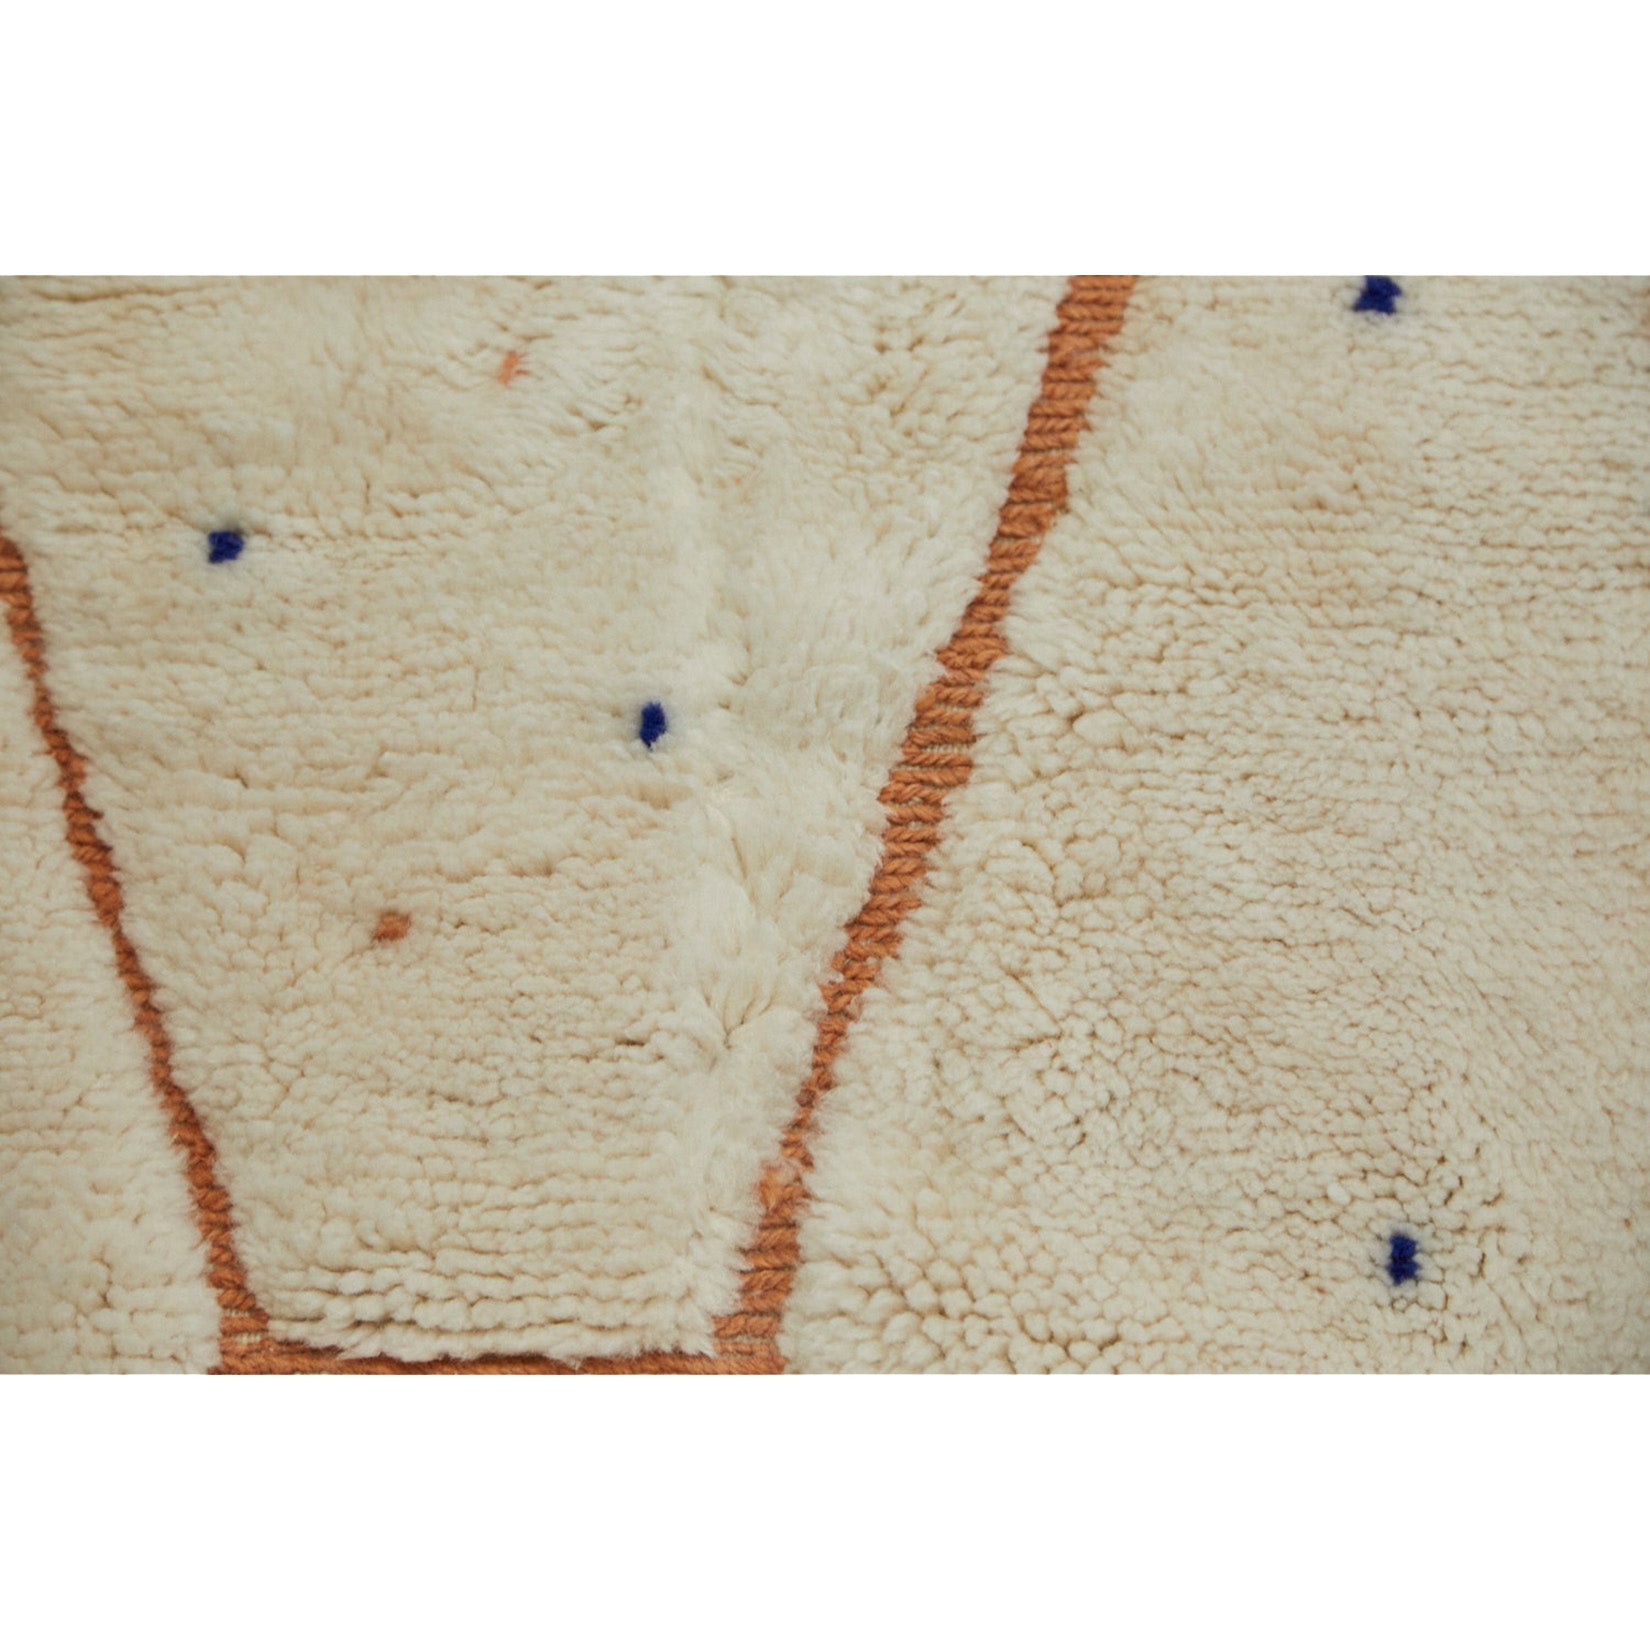 Cream colored Moroccan area rug with speckled details - Kantara | Moroccan Rugs